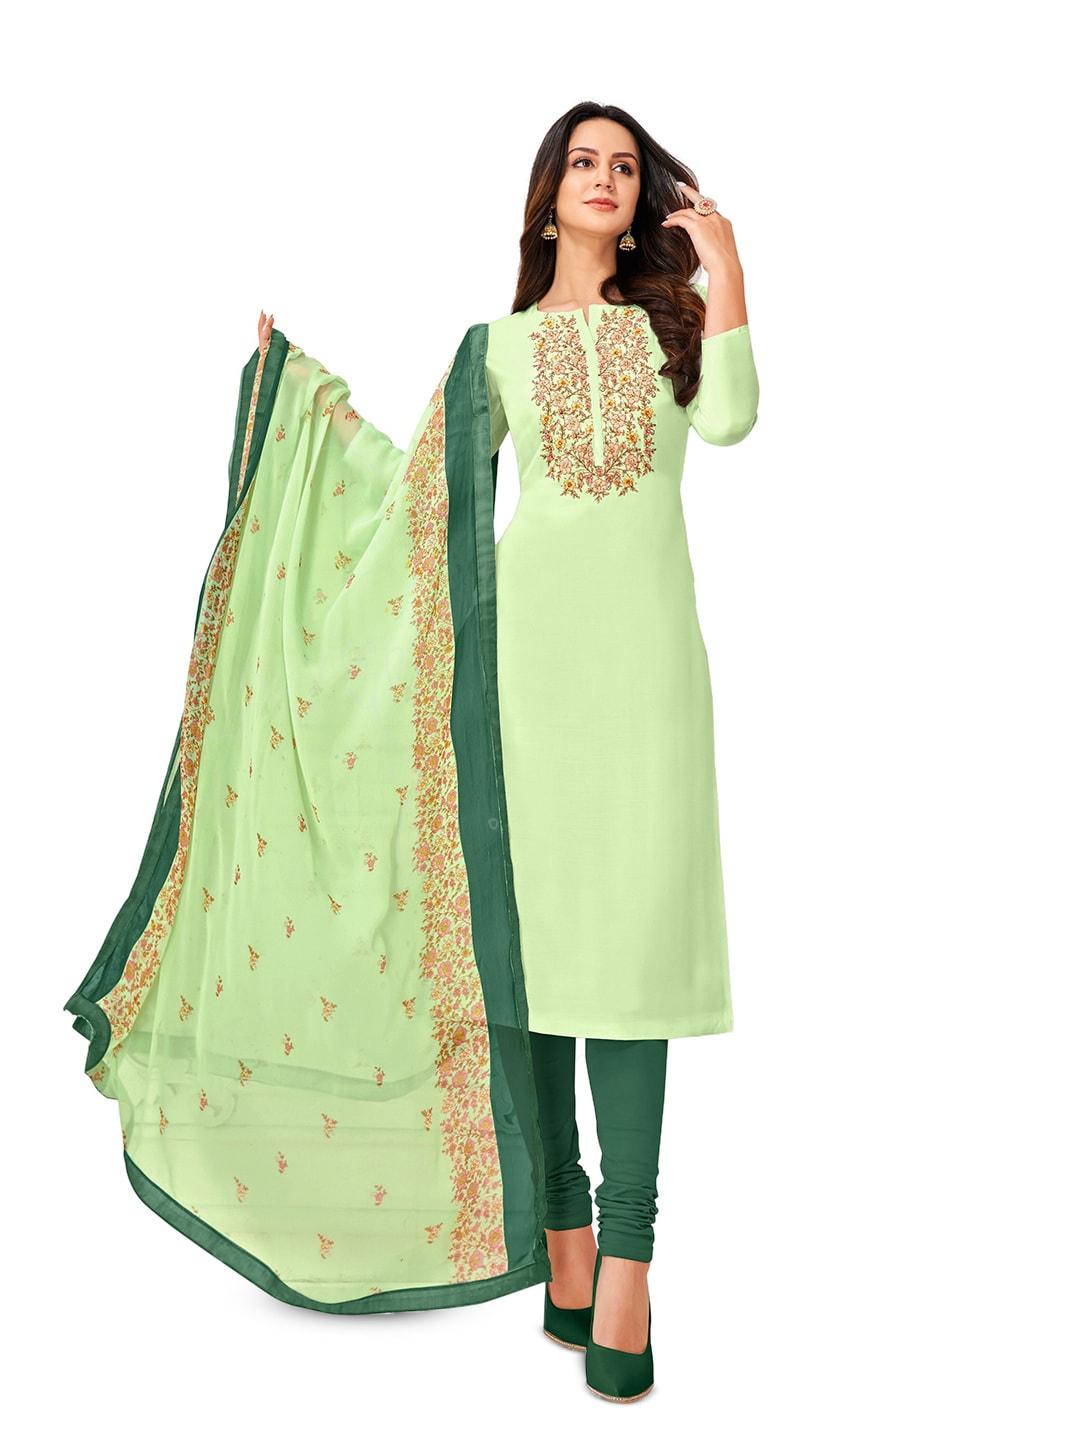 MANVAA Green Embellished Unstitched Dress Material